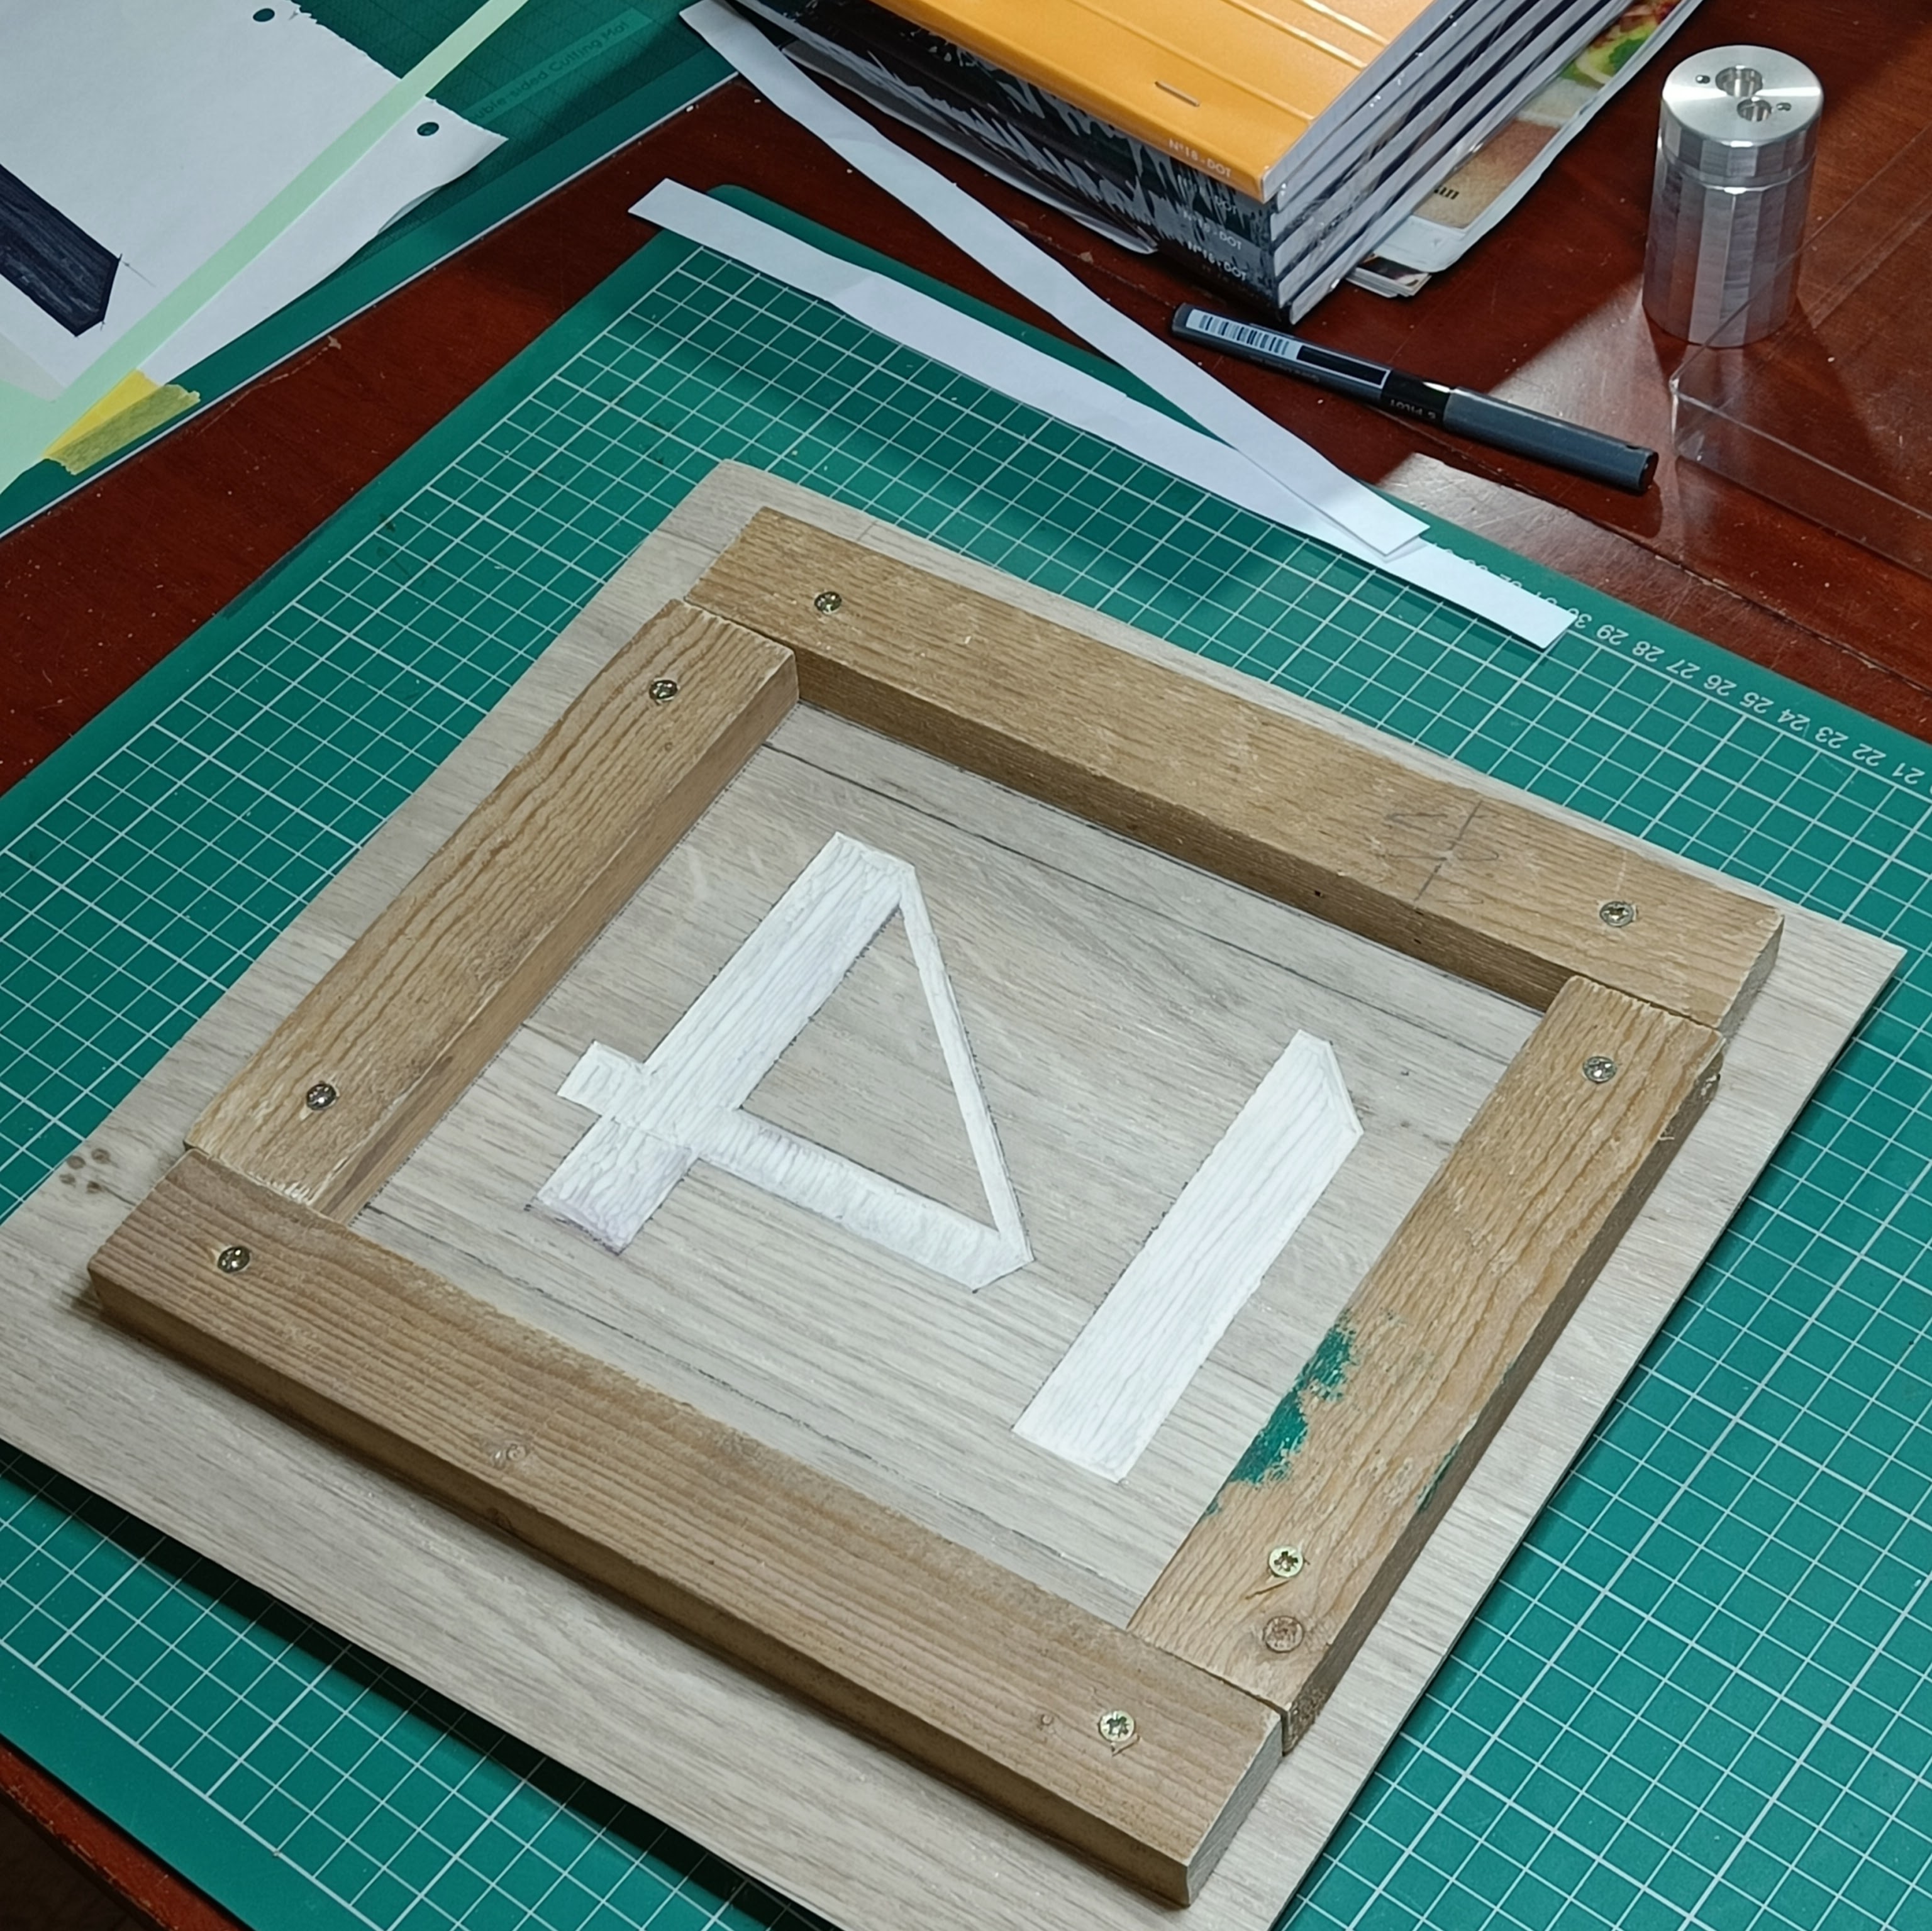 a crude wooden frame is screwed onto a piece of cut
  bathroom vinyl (showing the number 14). The vinyl is slightly
  lifted off from the cutting mat, suggesting the piece of OSB
  behind. A few items lay about on the table: a Pilot V5 pen, an
  expensive pencil sharpener made from aircraft aluminium.